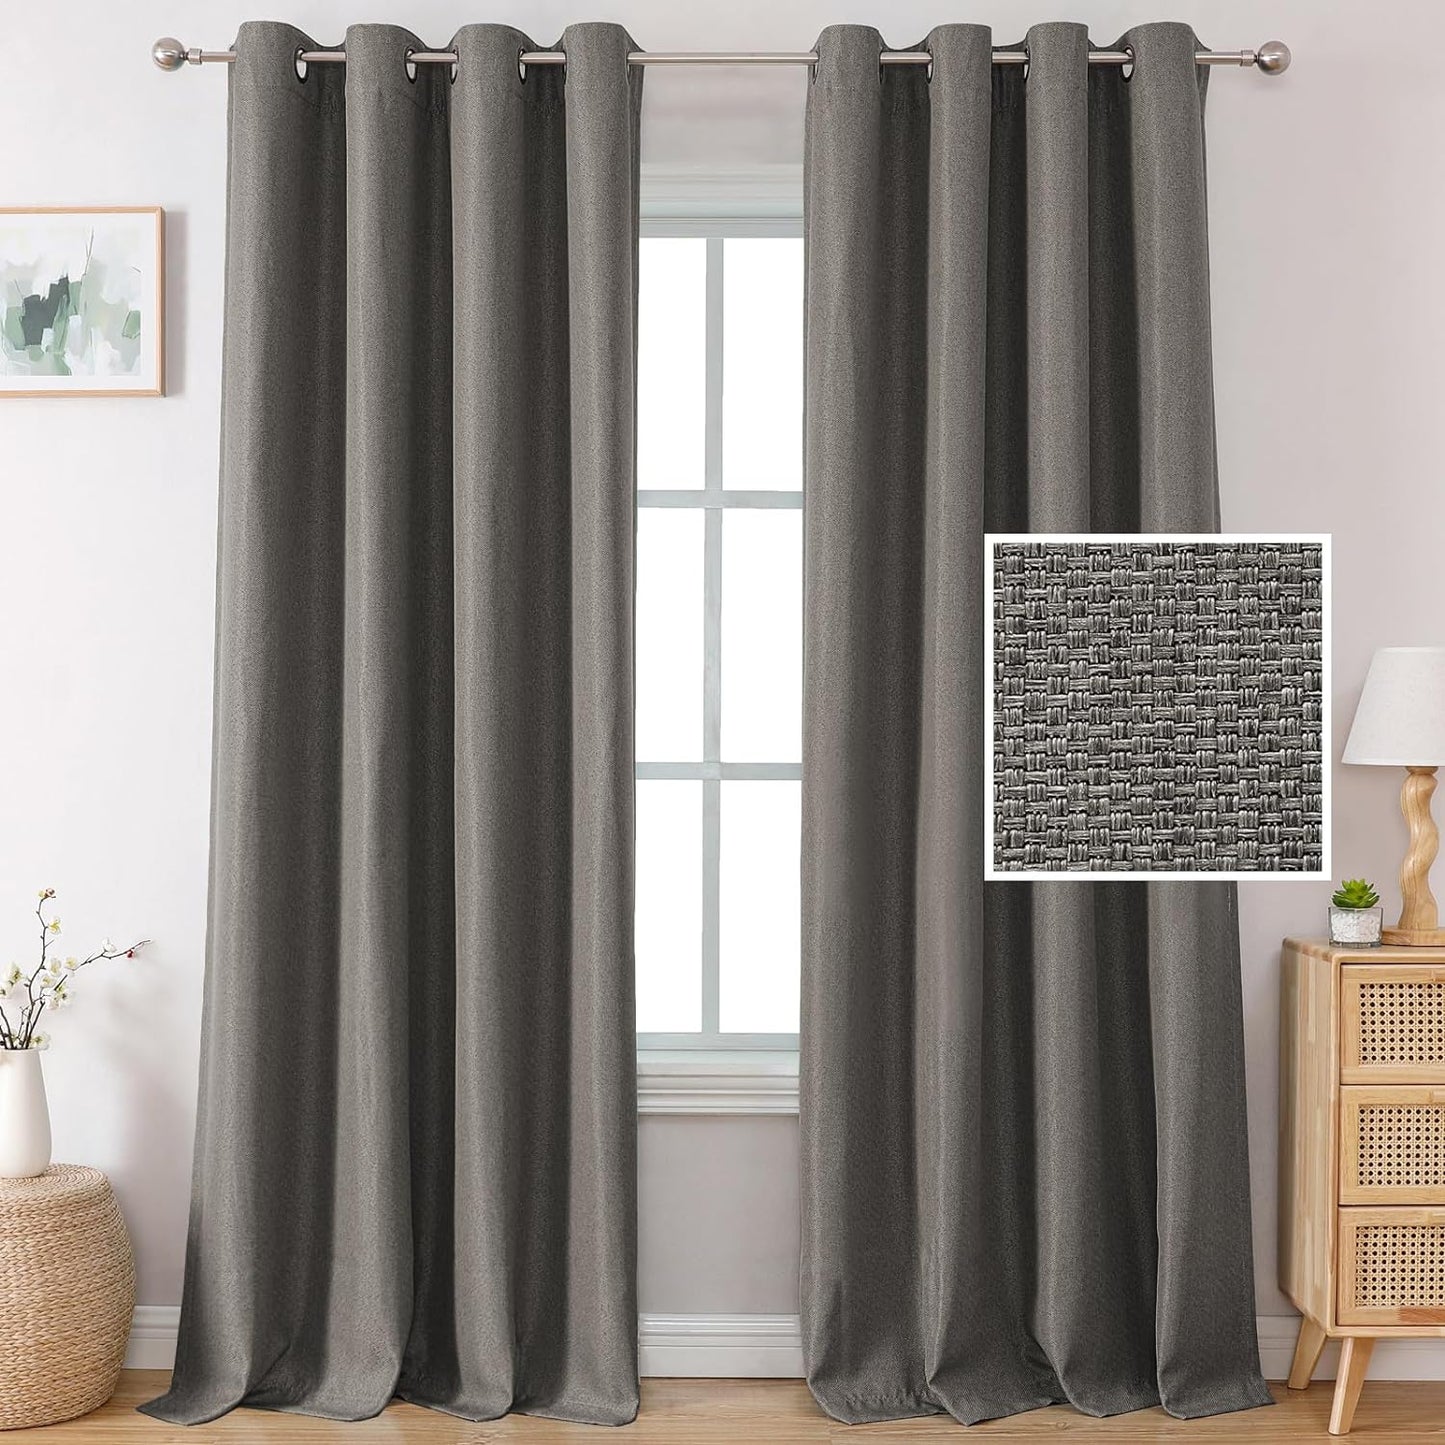 H.VERSAILTEX Linen Blackout Curtains 84 Inches Long Thermal Insulated Room Darkening Linen Curtains for Bedroom Textured Burlap Grommet Window Curtains for Living Room, Bluestone and Taupe, 2 Panels  H.VERSAILTEX Taupe Gray 52"W X 96"L 